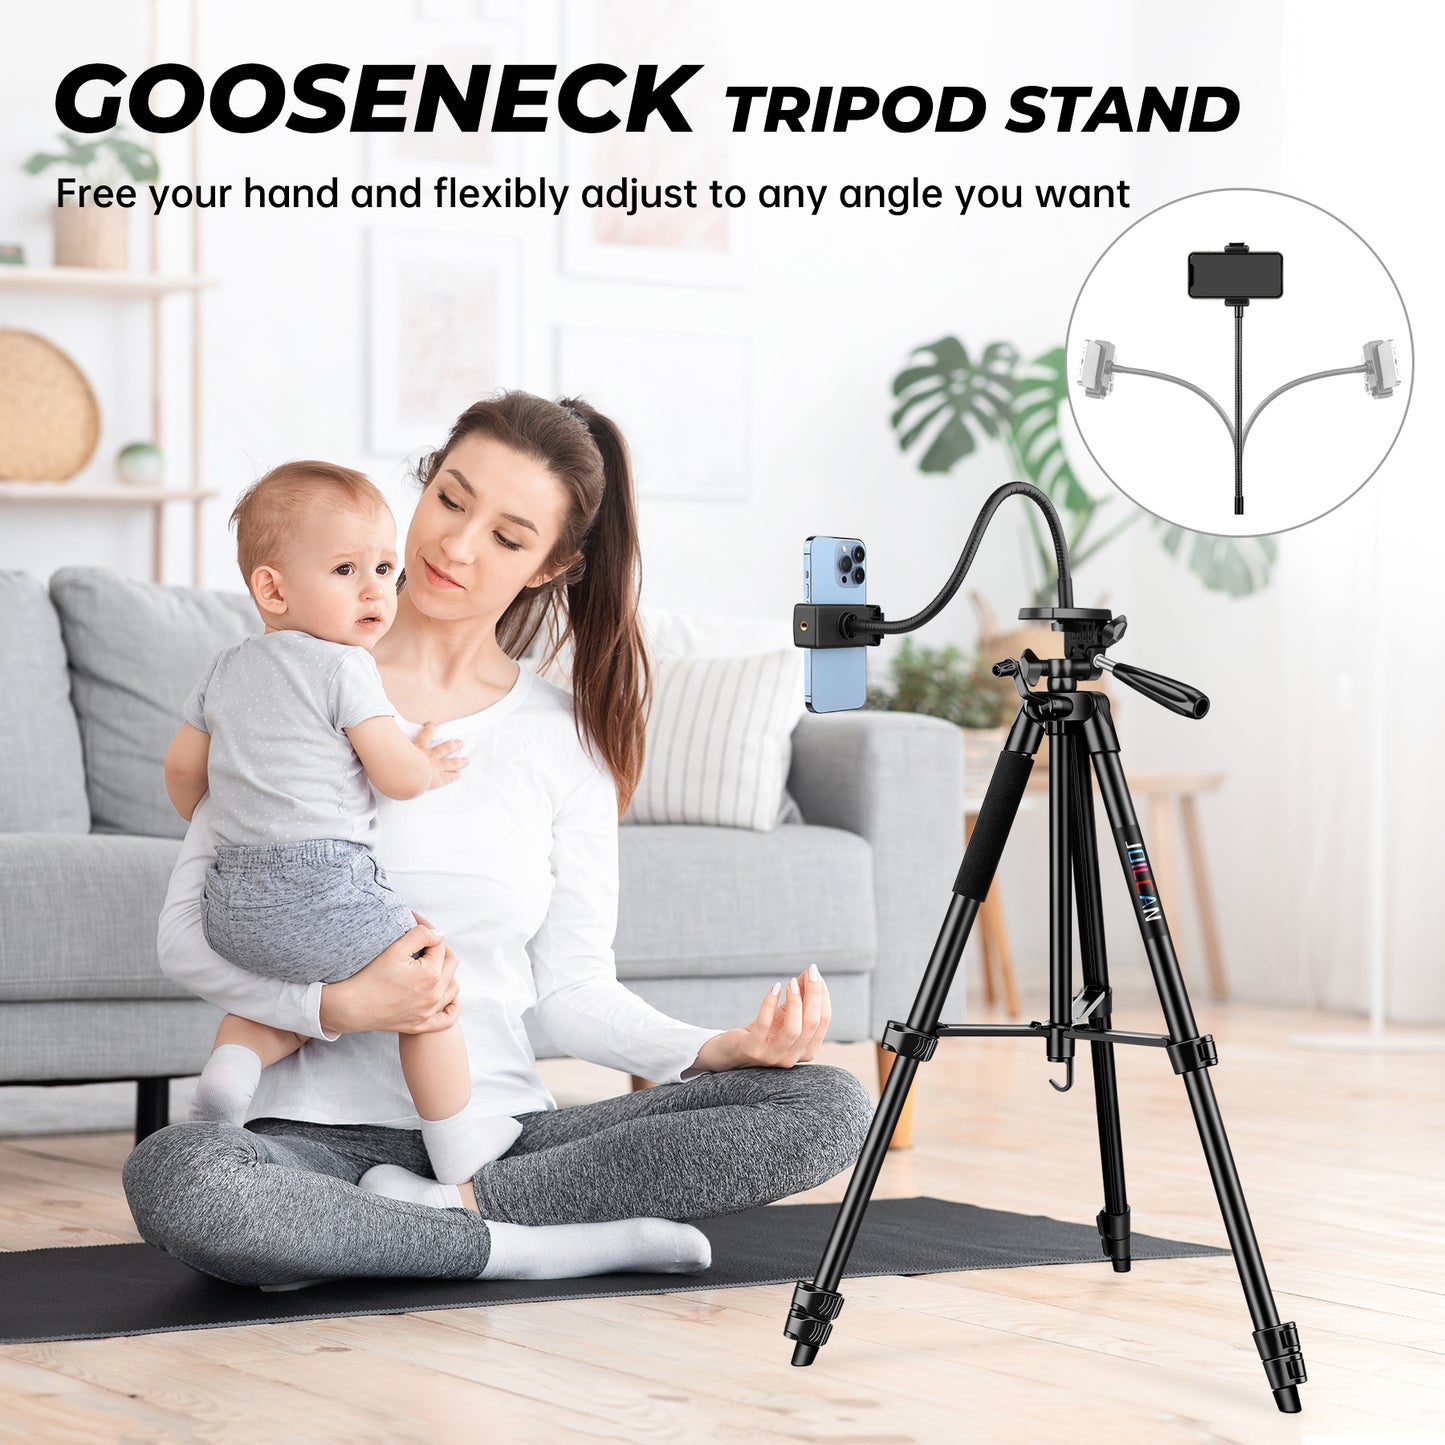 JOILCAN Phone Tripod for iPhone 67.7", Extendable Mobile Phone Tripod Stand with Remote, Phone Holder with Cold Shoe Mount, Lightweight Camera Tripod, Extendable Tripod for iPhone/Android Smartphones(EU)